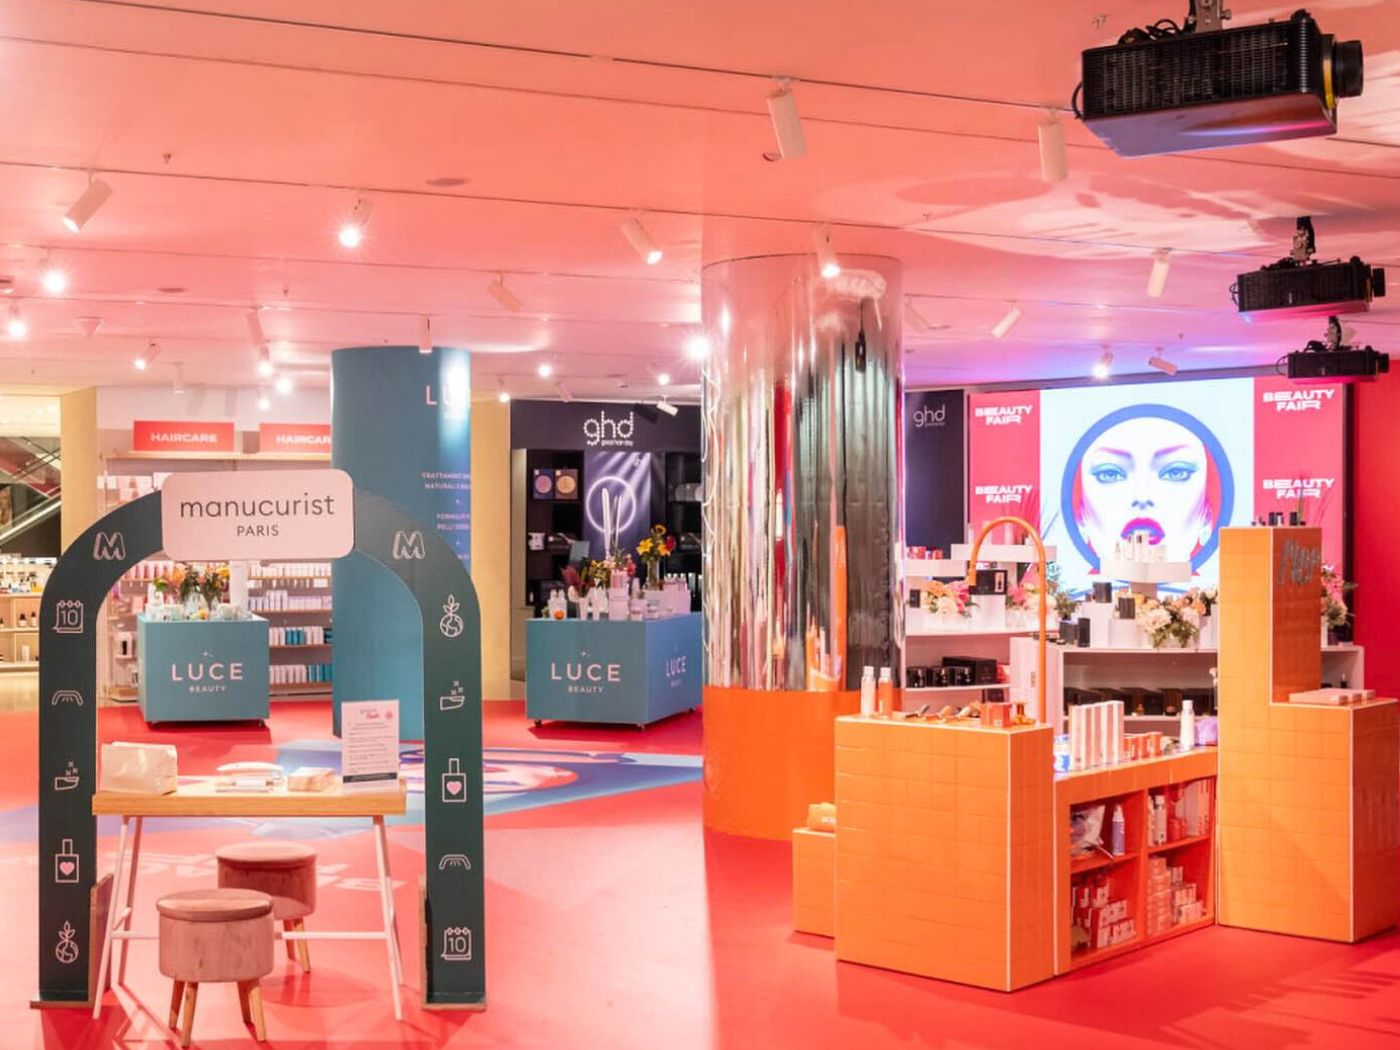 The interior of a beauty department within a store, with brightly coloured orange and pink counters and displays.